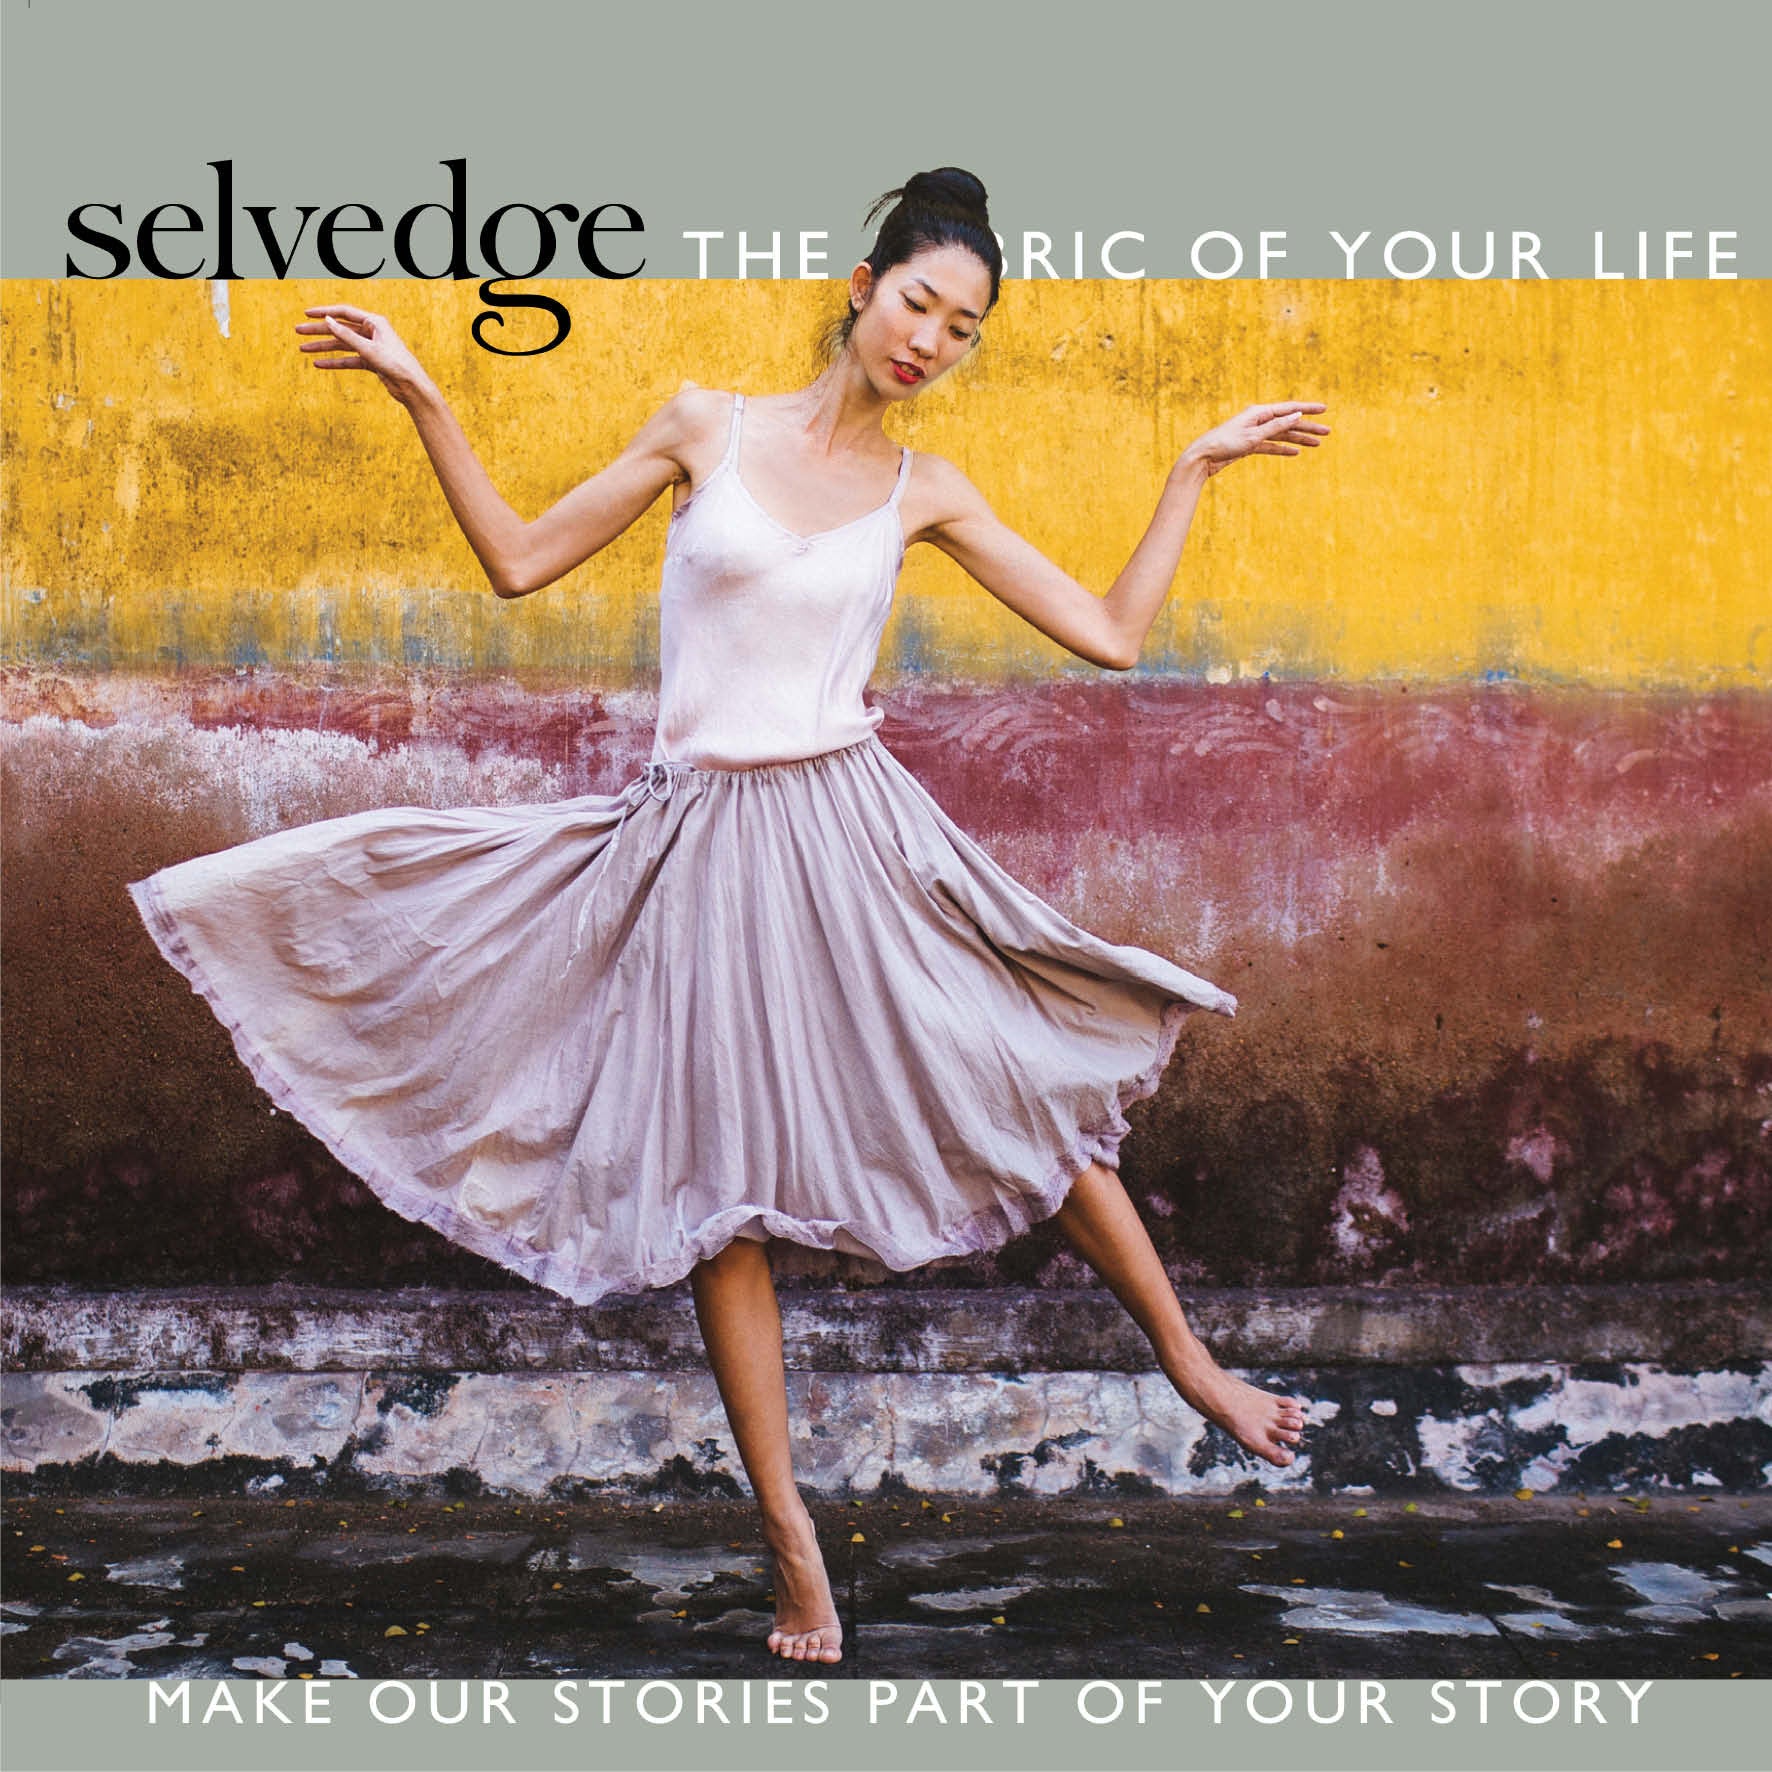 Issue 76 Trade Winds - Selvedge Magazine